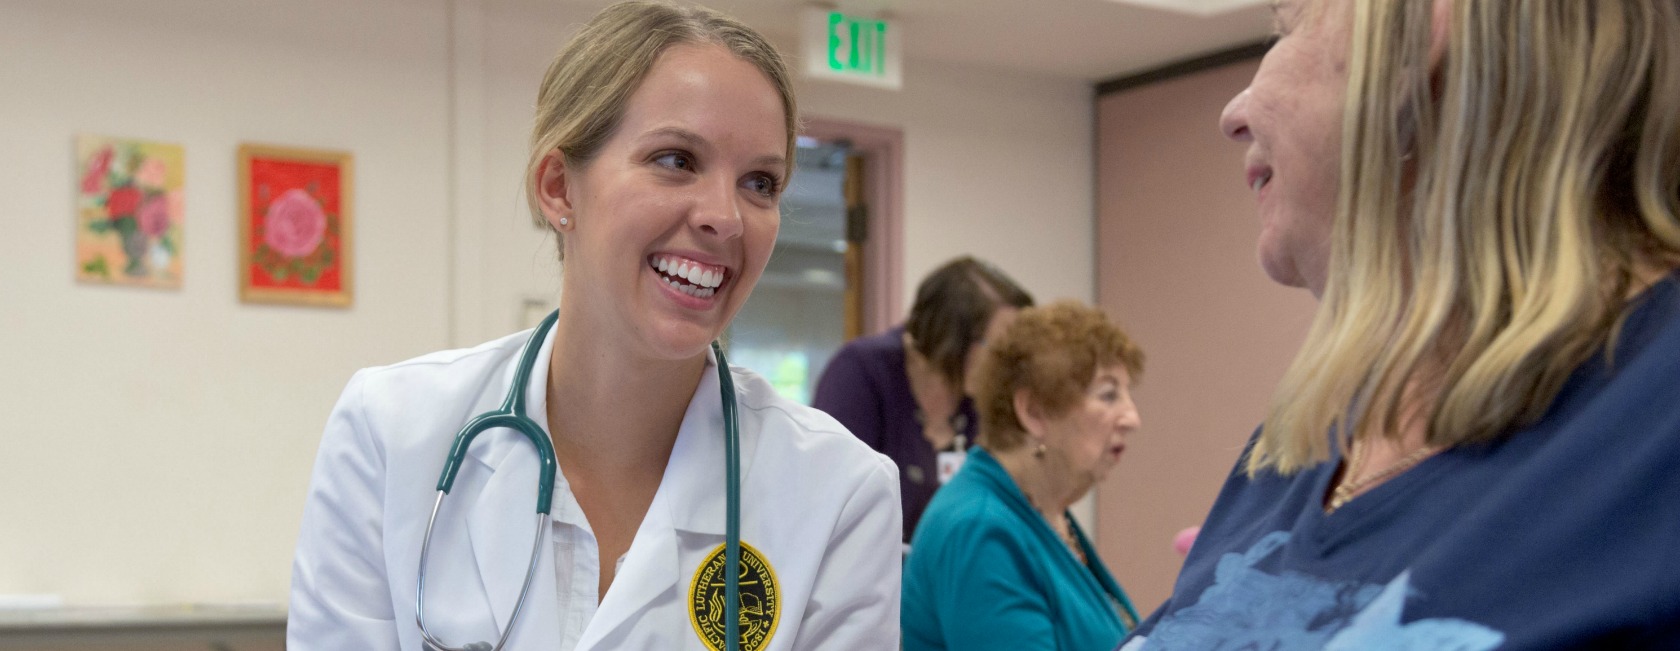 A PLU Nurse Practitioner student works during a health-outreach activity at the Sumner Senior Center. (Photo: John Froschauer/PLU)